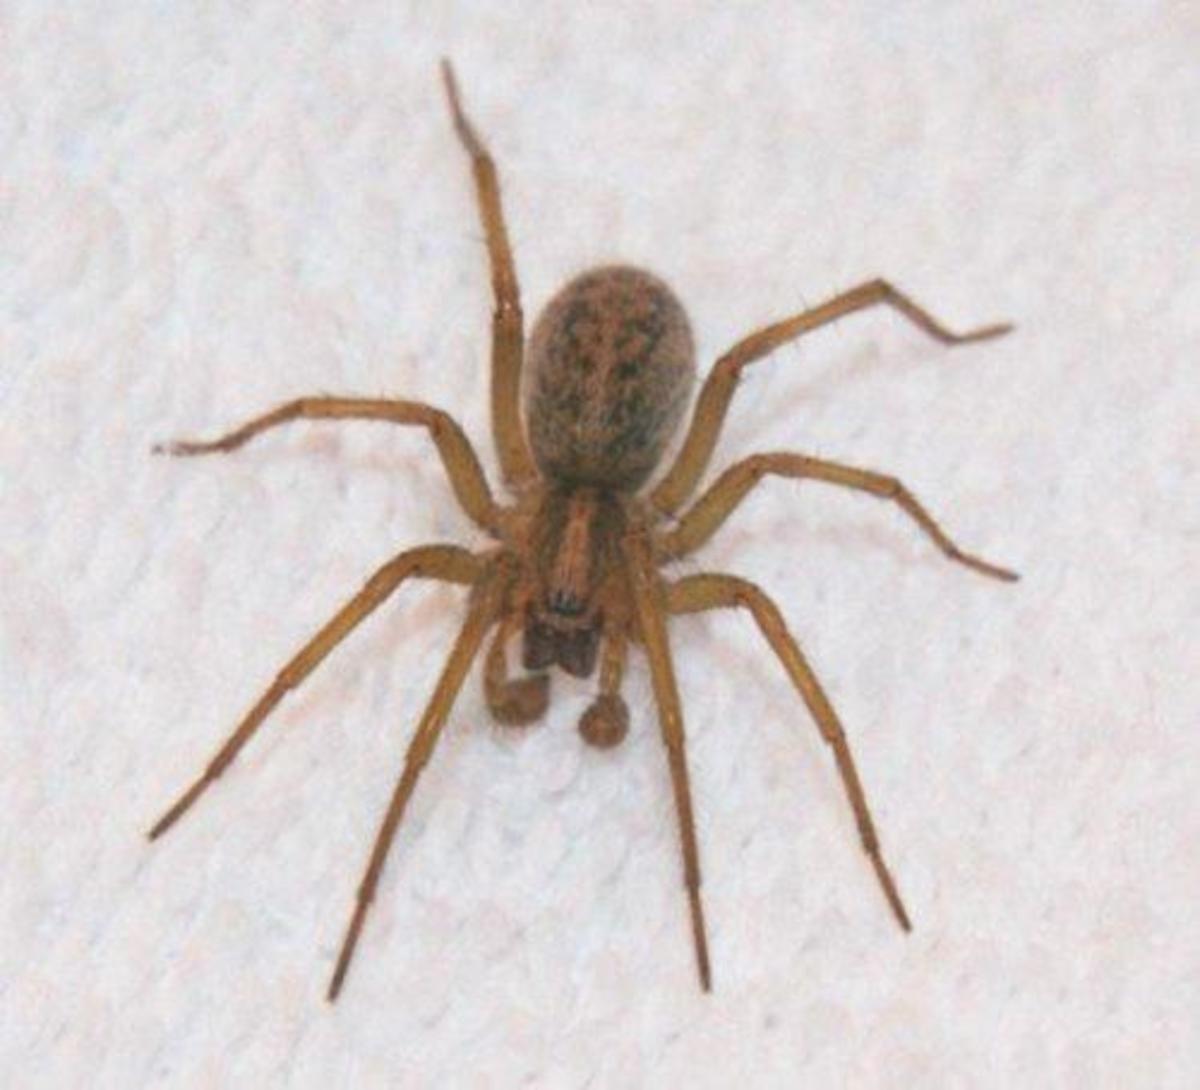 Common House Spider Bites Pictures